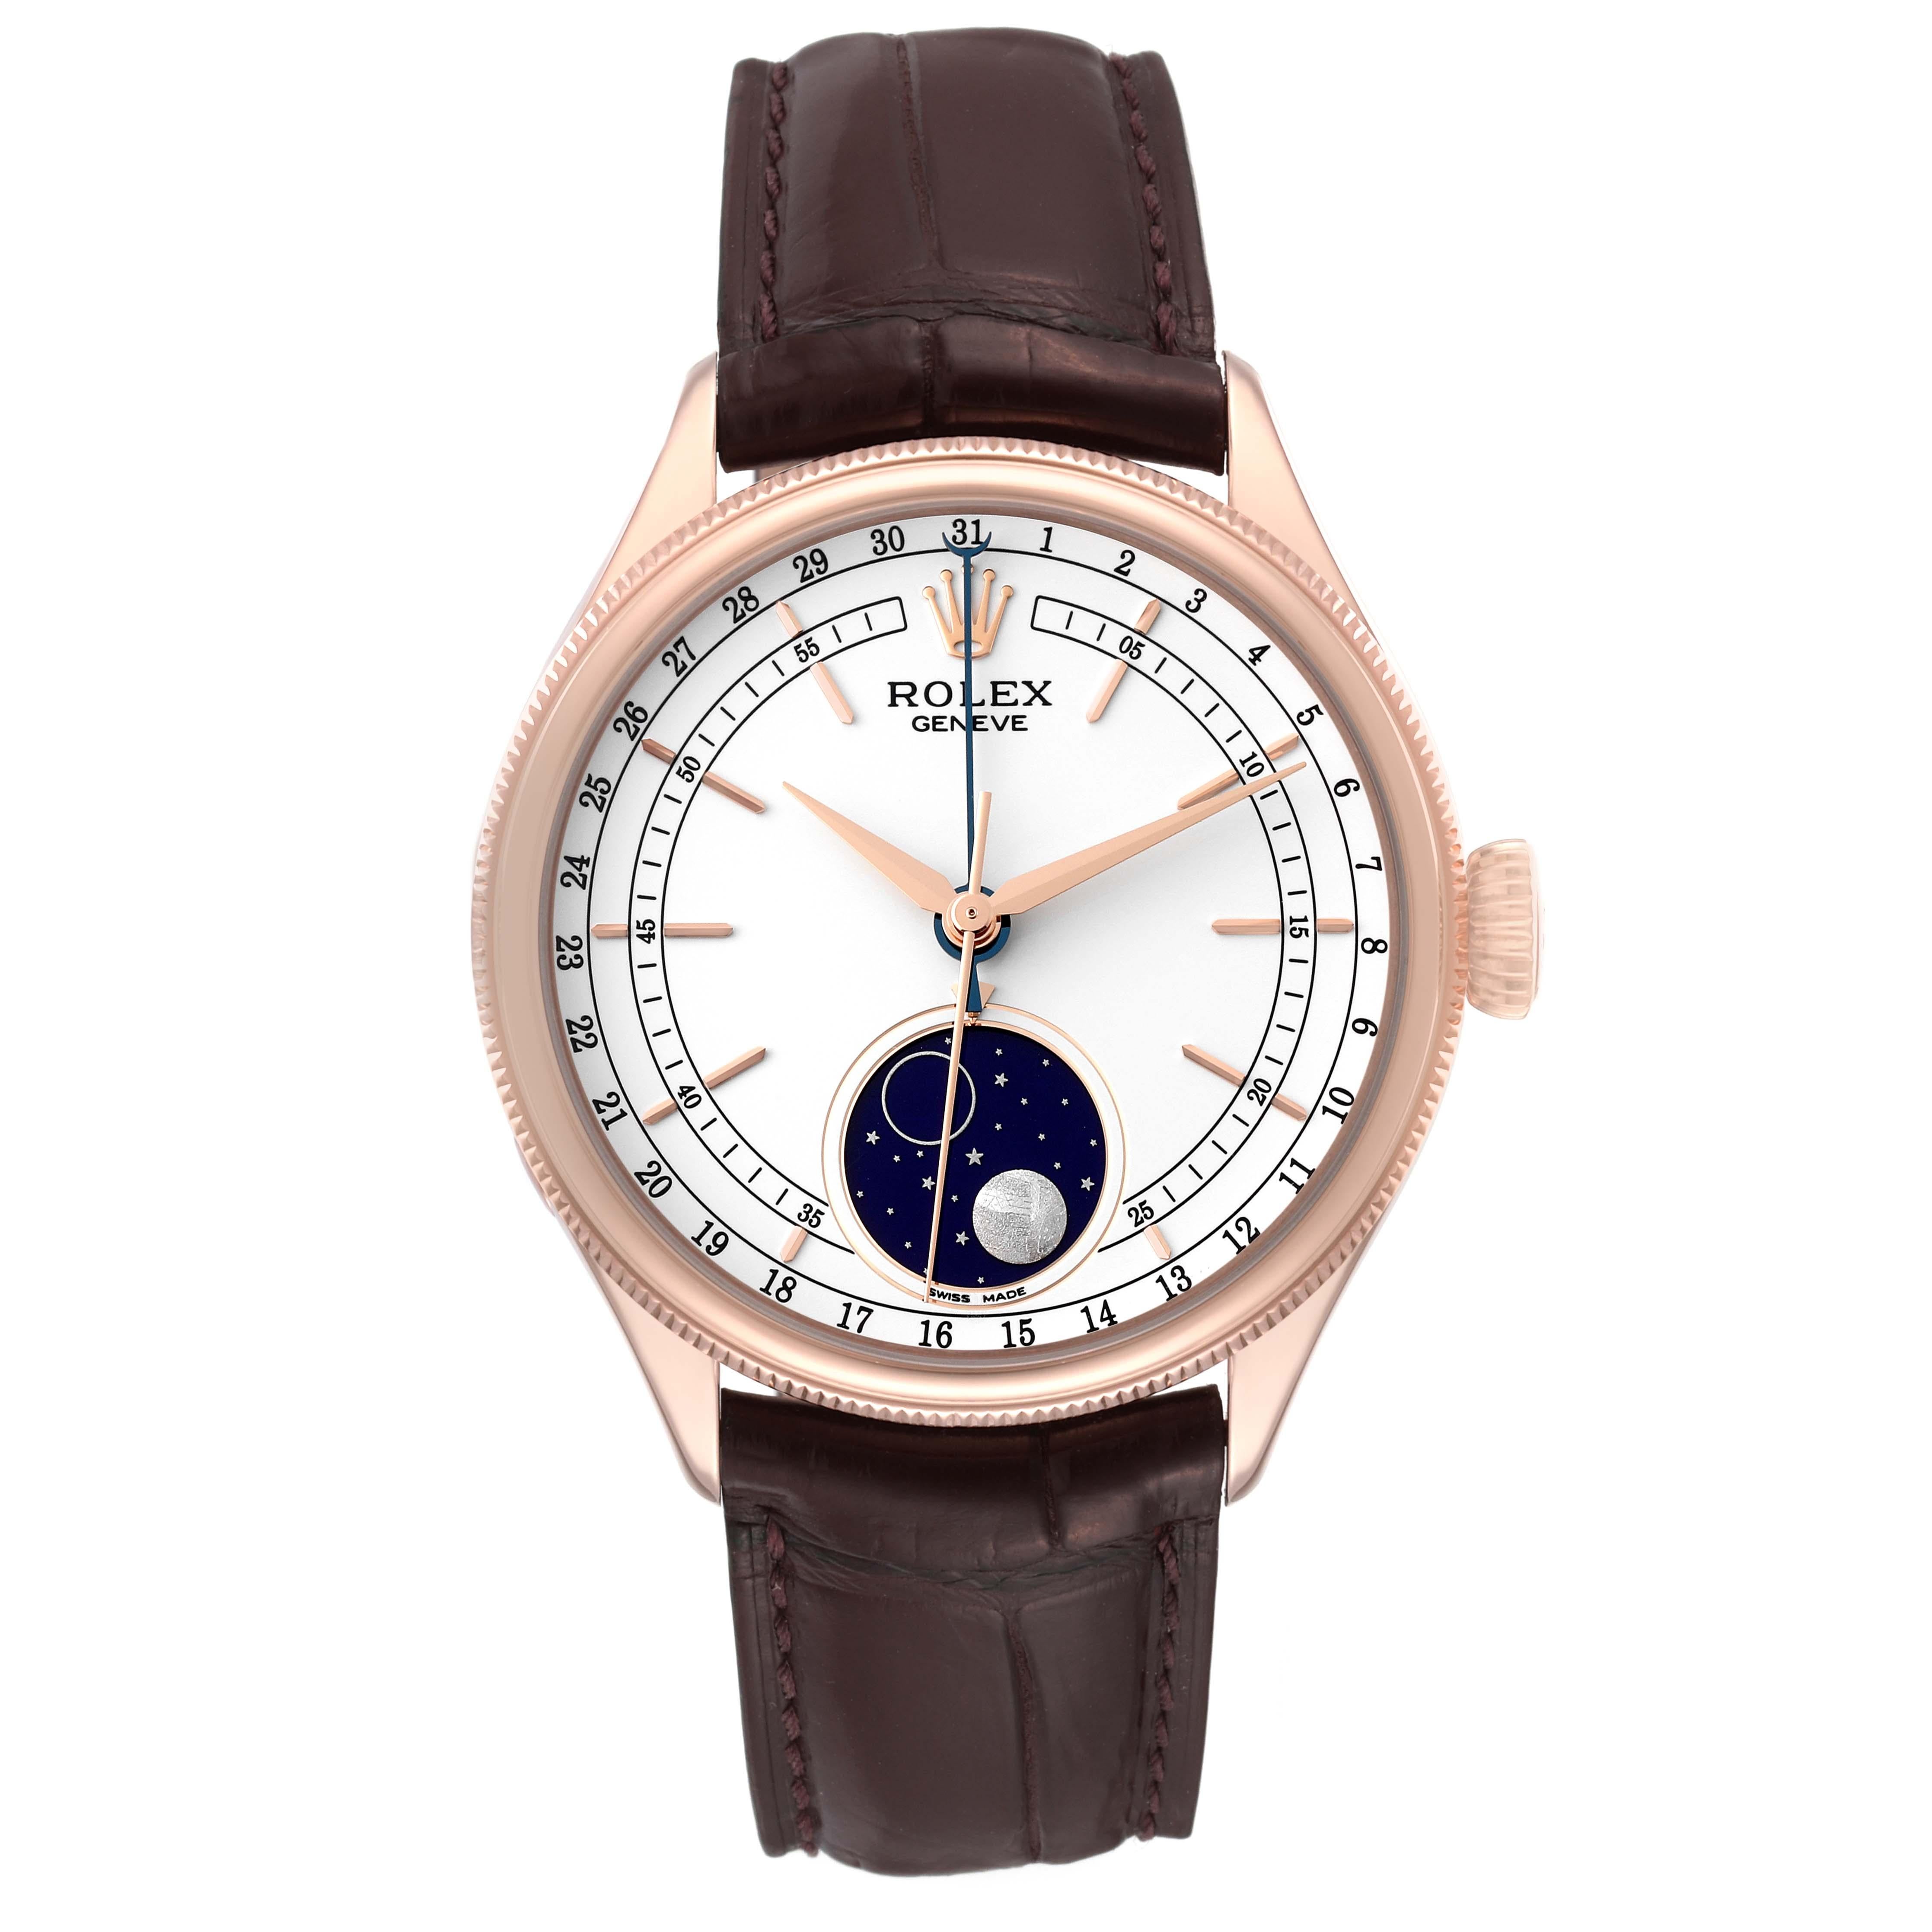 Rolex Cellini Moonphase White Dial Rose Gold Mens Watch 50535. Automatic self-winding movement. Officially certified Swiss chronometer (COSC). Paramagnetic blue Parachrom hairspring. Bidirectional self-winding via Perpetual rotor. 18K Everose gold